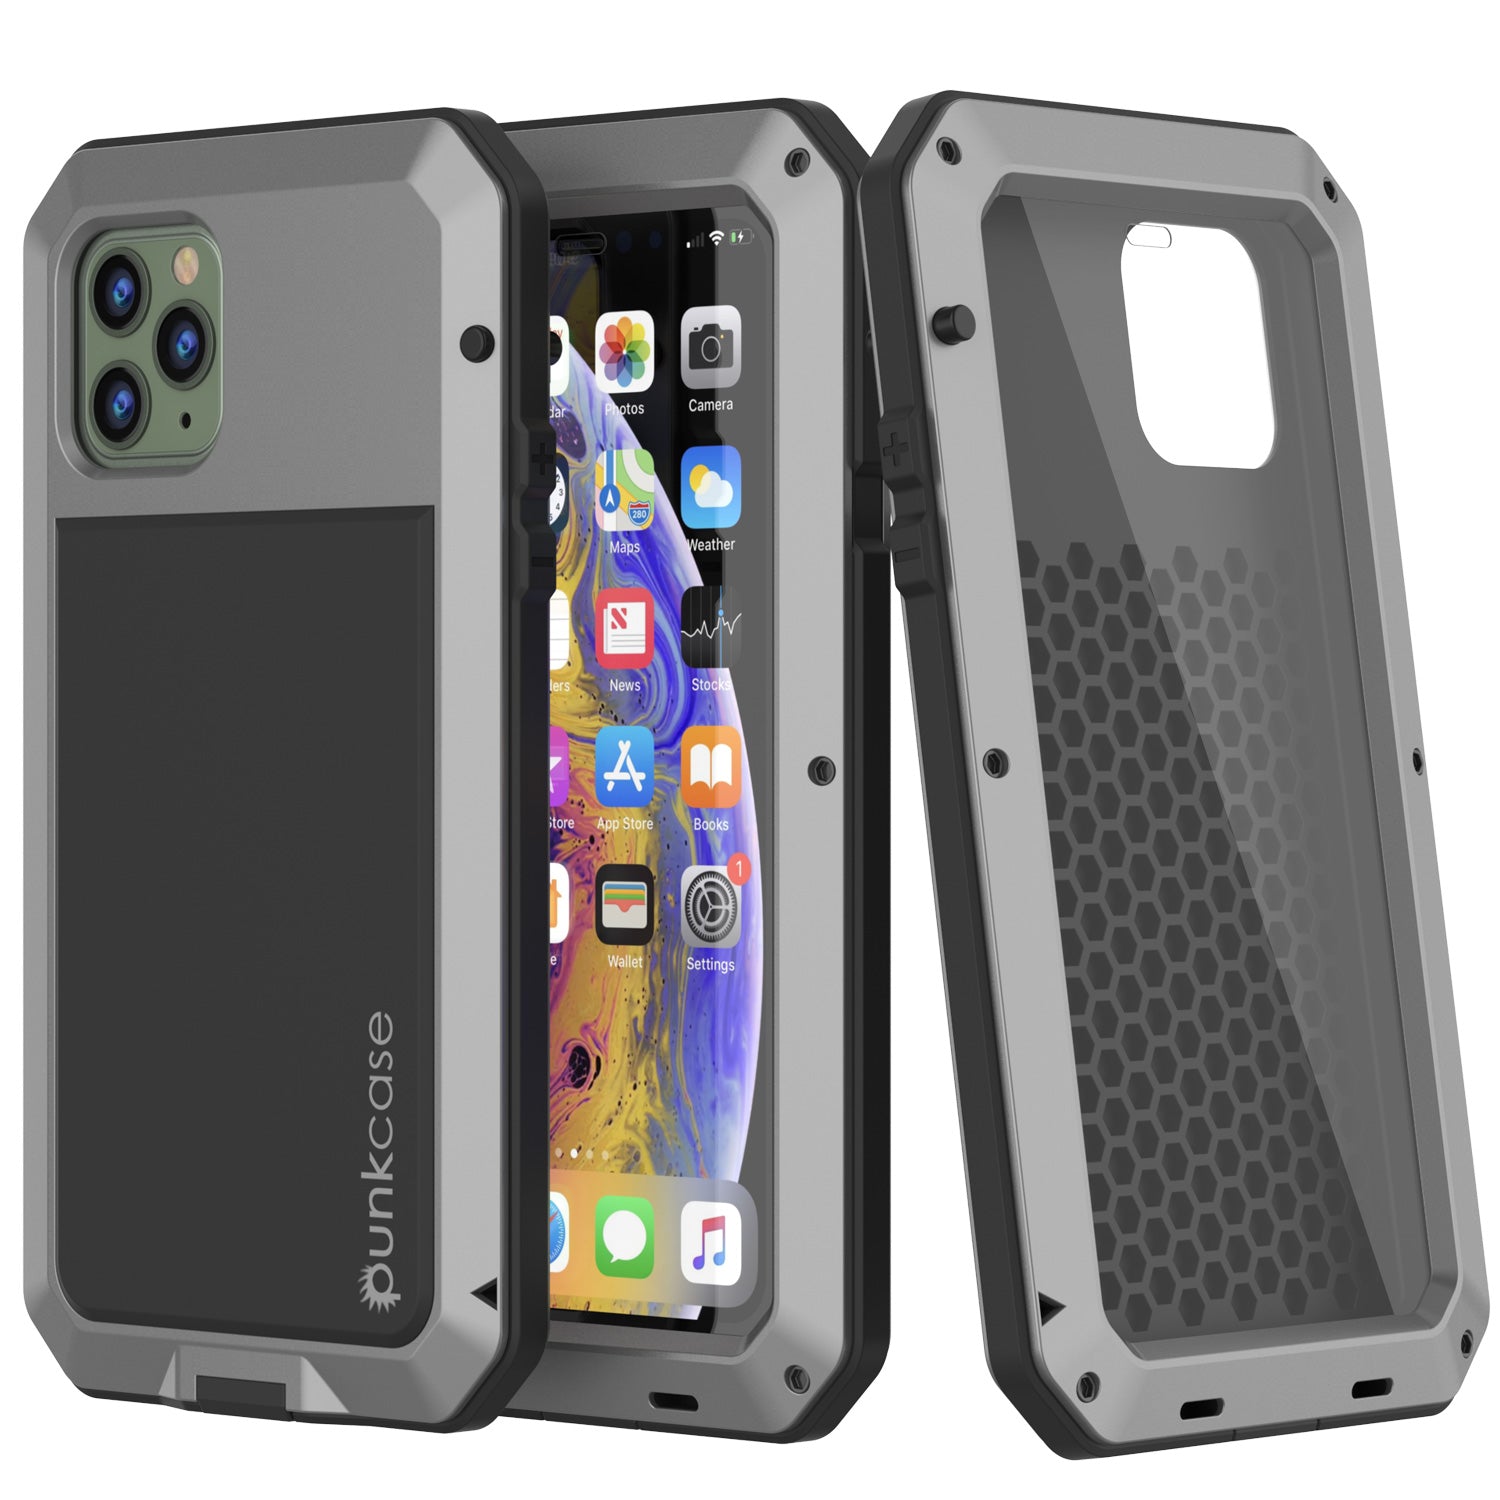 iPhone 11 Pro Max Metal Case, Heavy Duty Military Grade Armor Cover [s